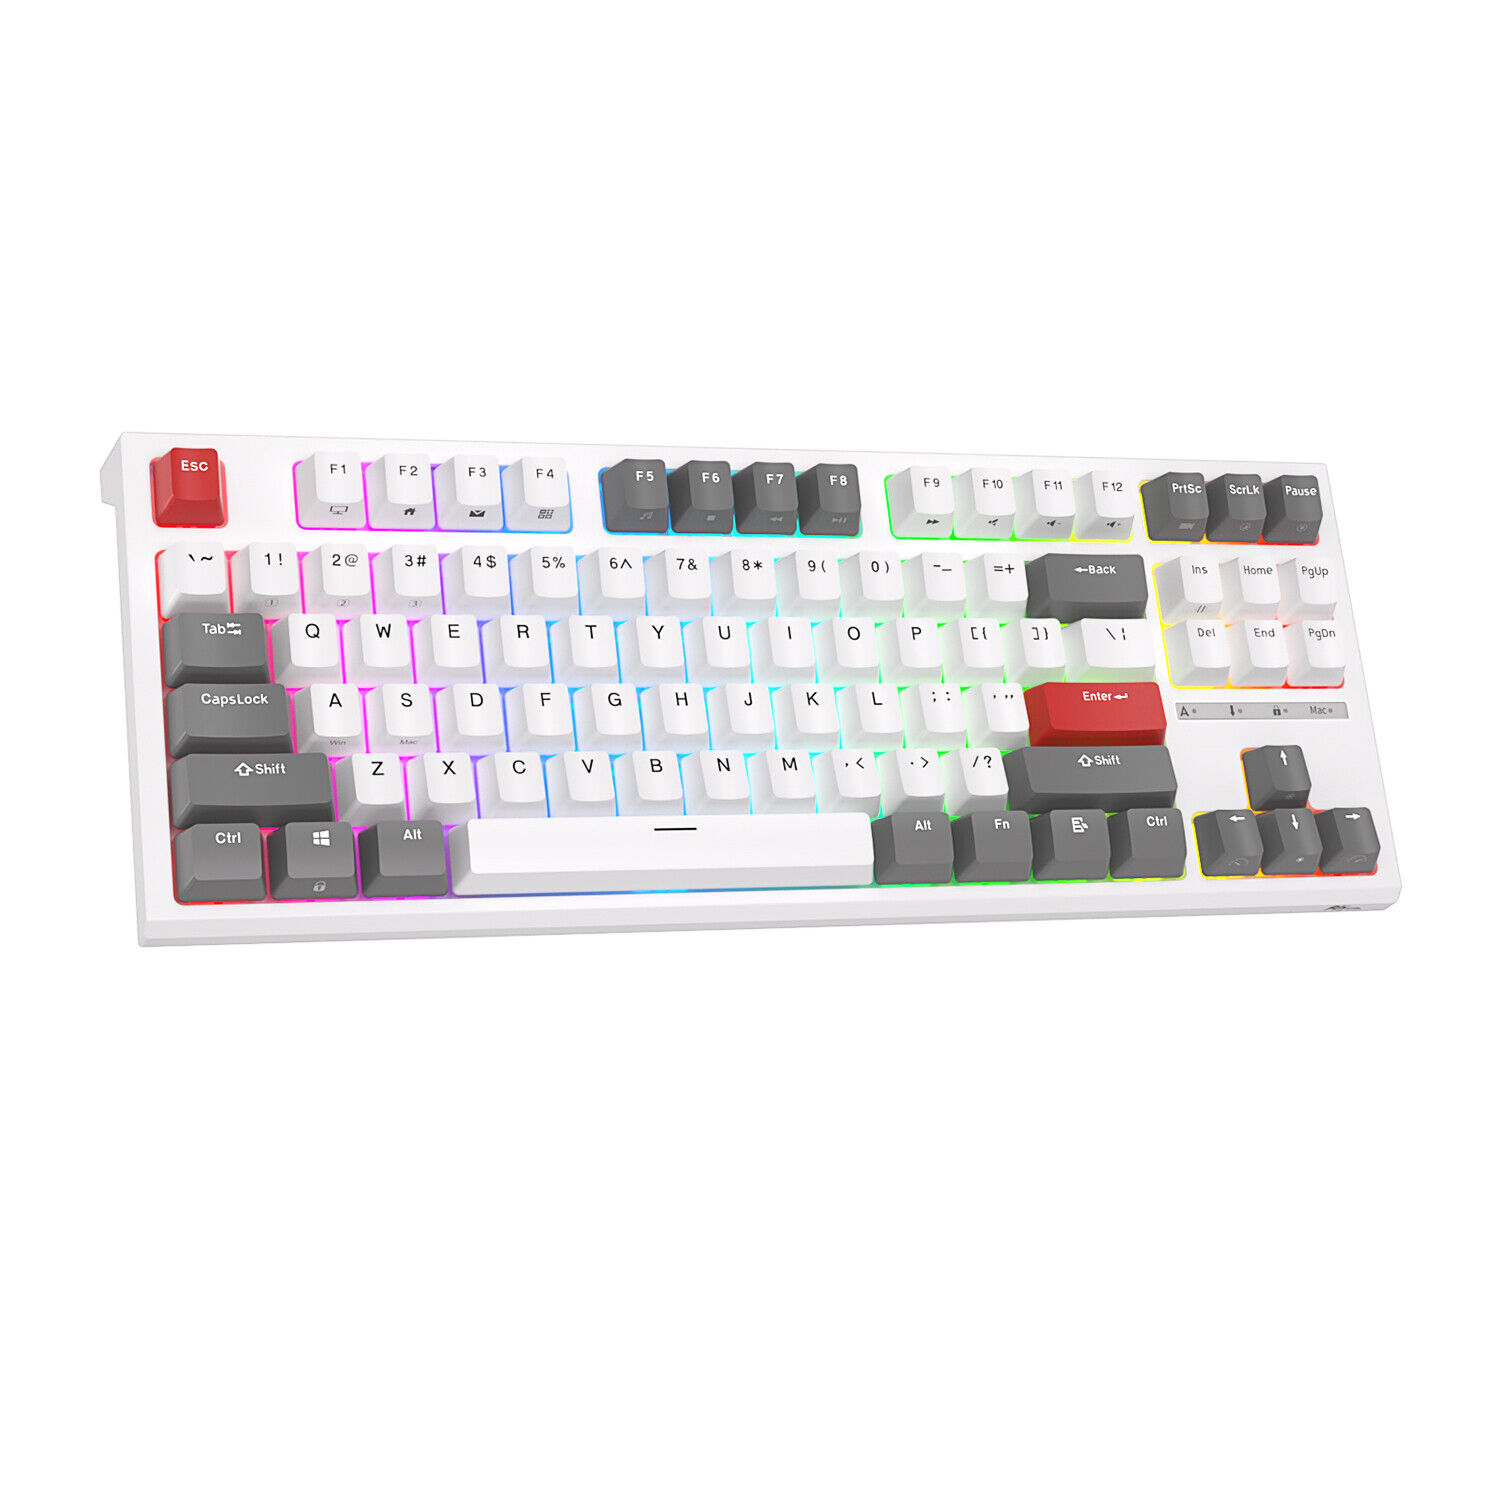 RK ROYAL KLUDGE R87 Mechanical Keyboard Hot Swappable Wired Gaming Keyboard